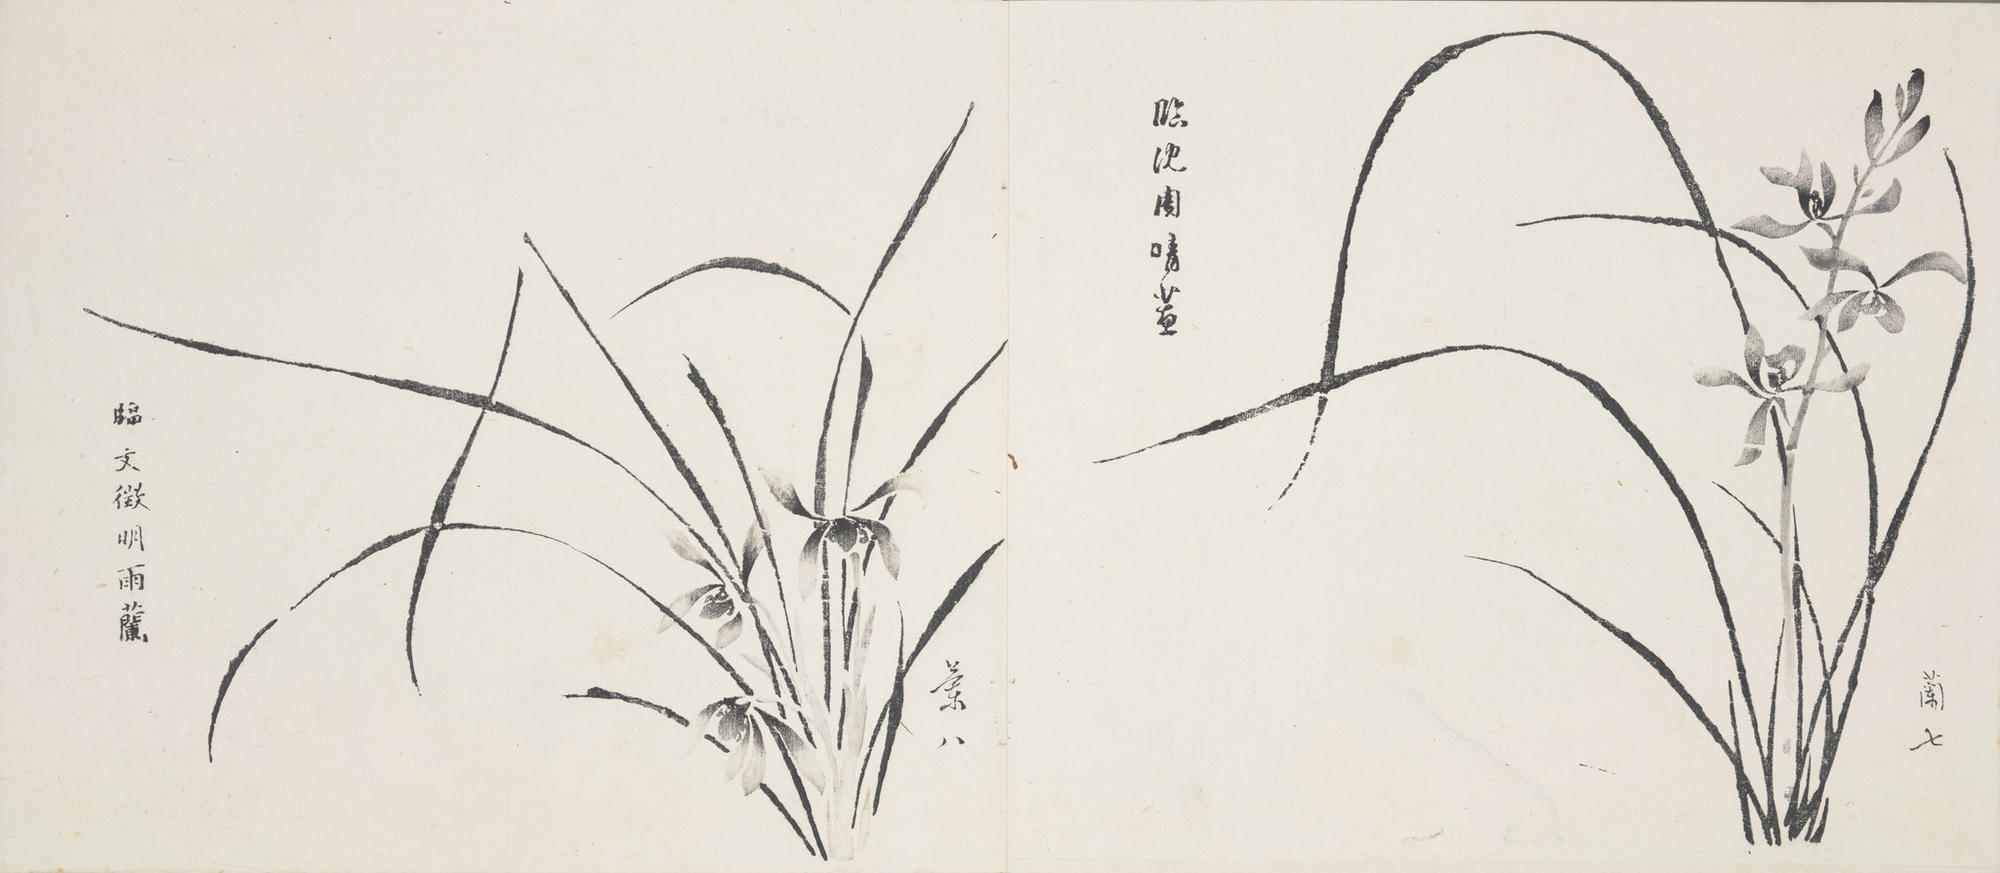 Lotus leaf, lotus root and two jitou capsules, with calligraphy by Sun Yuwang, Fruit 10, 